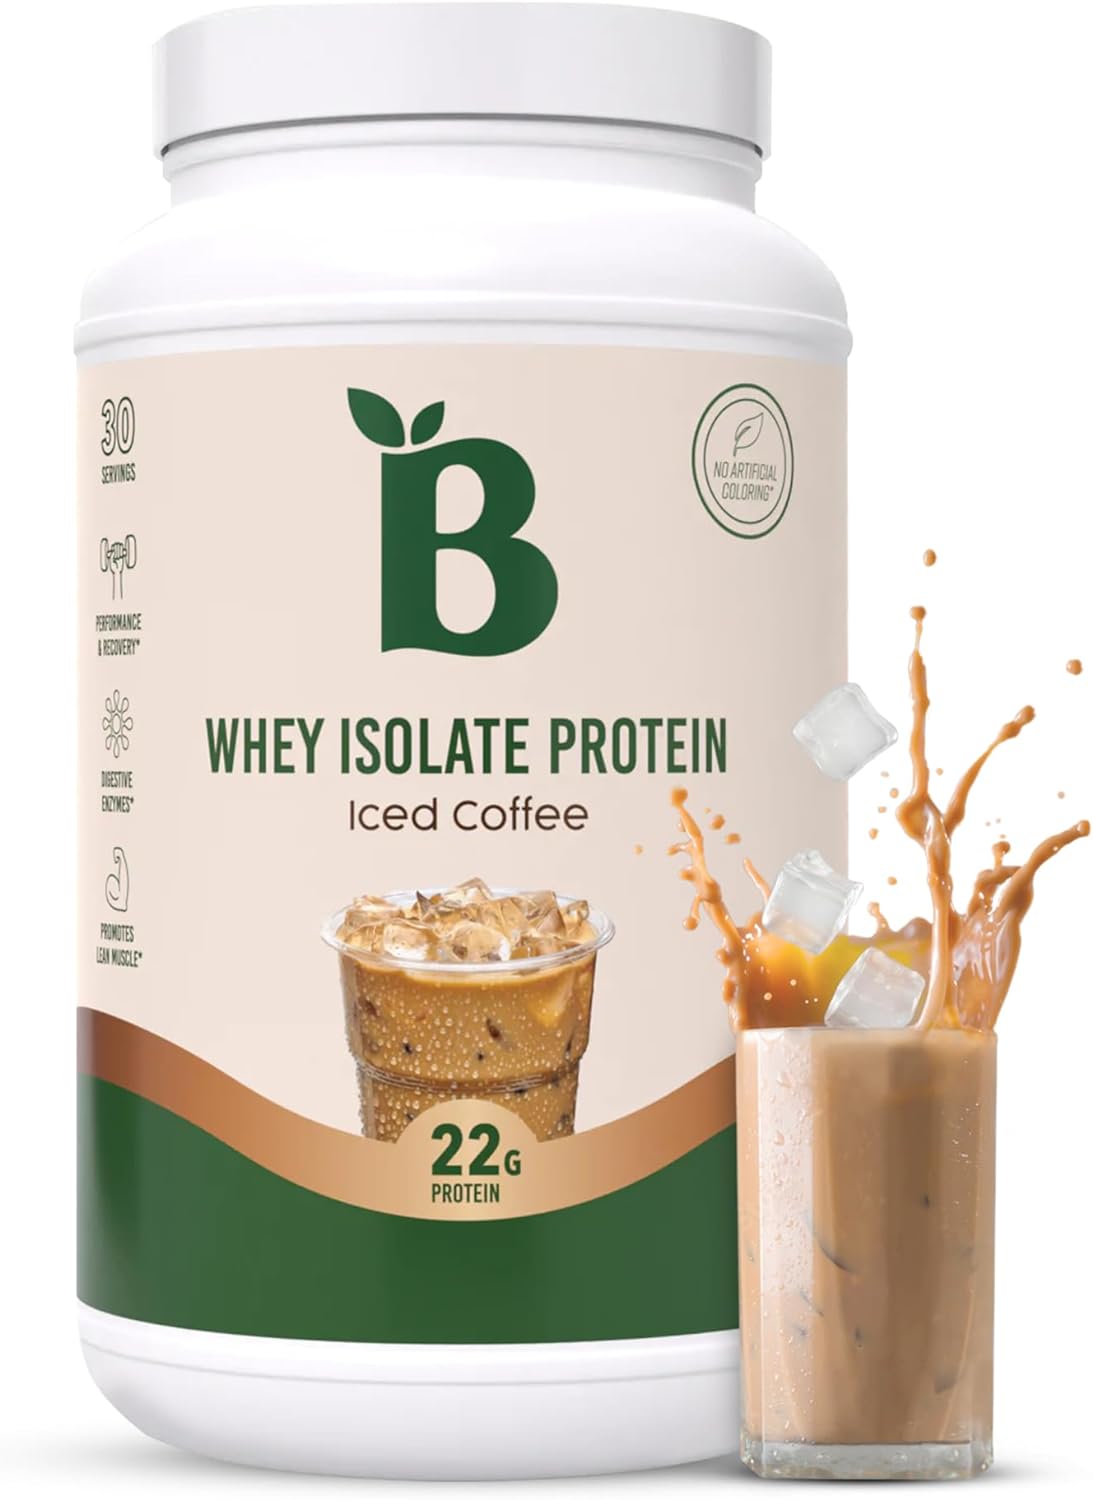 Bloom Nutrition Whey Isolate Protein Powder, Iced Coffee - Pure Iso Po